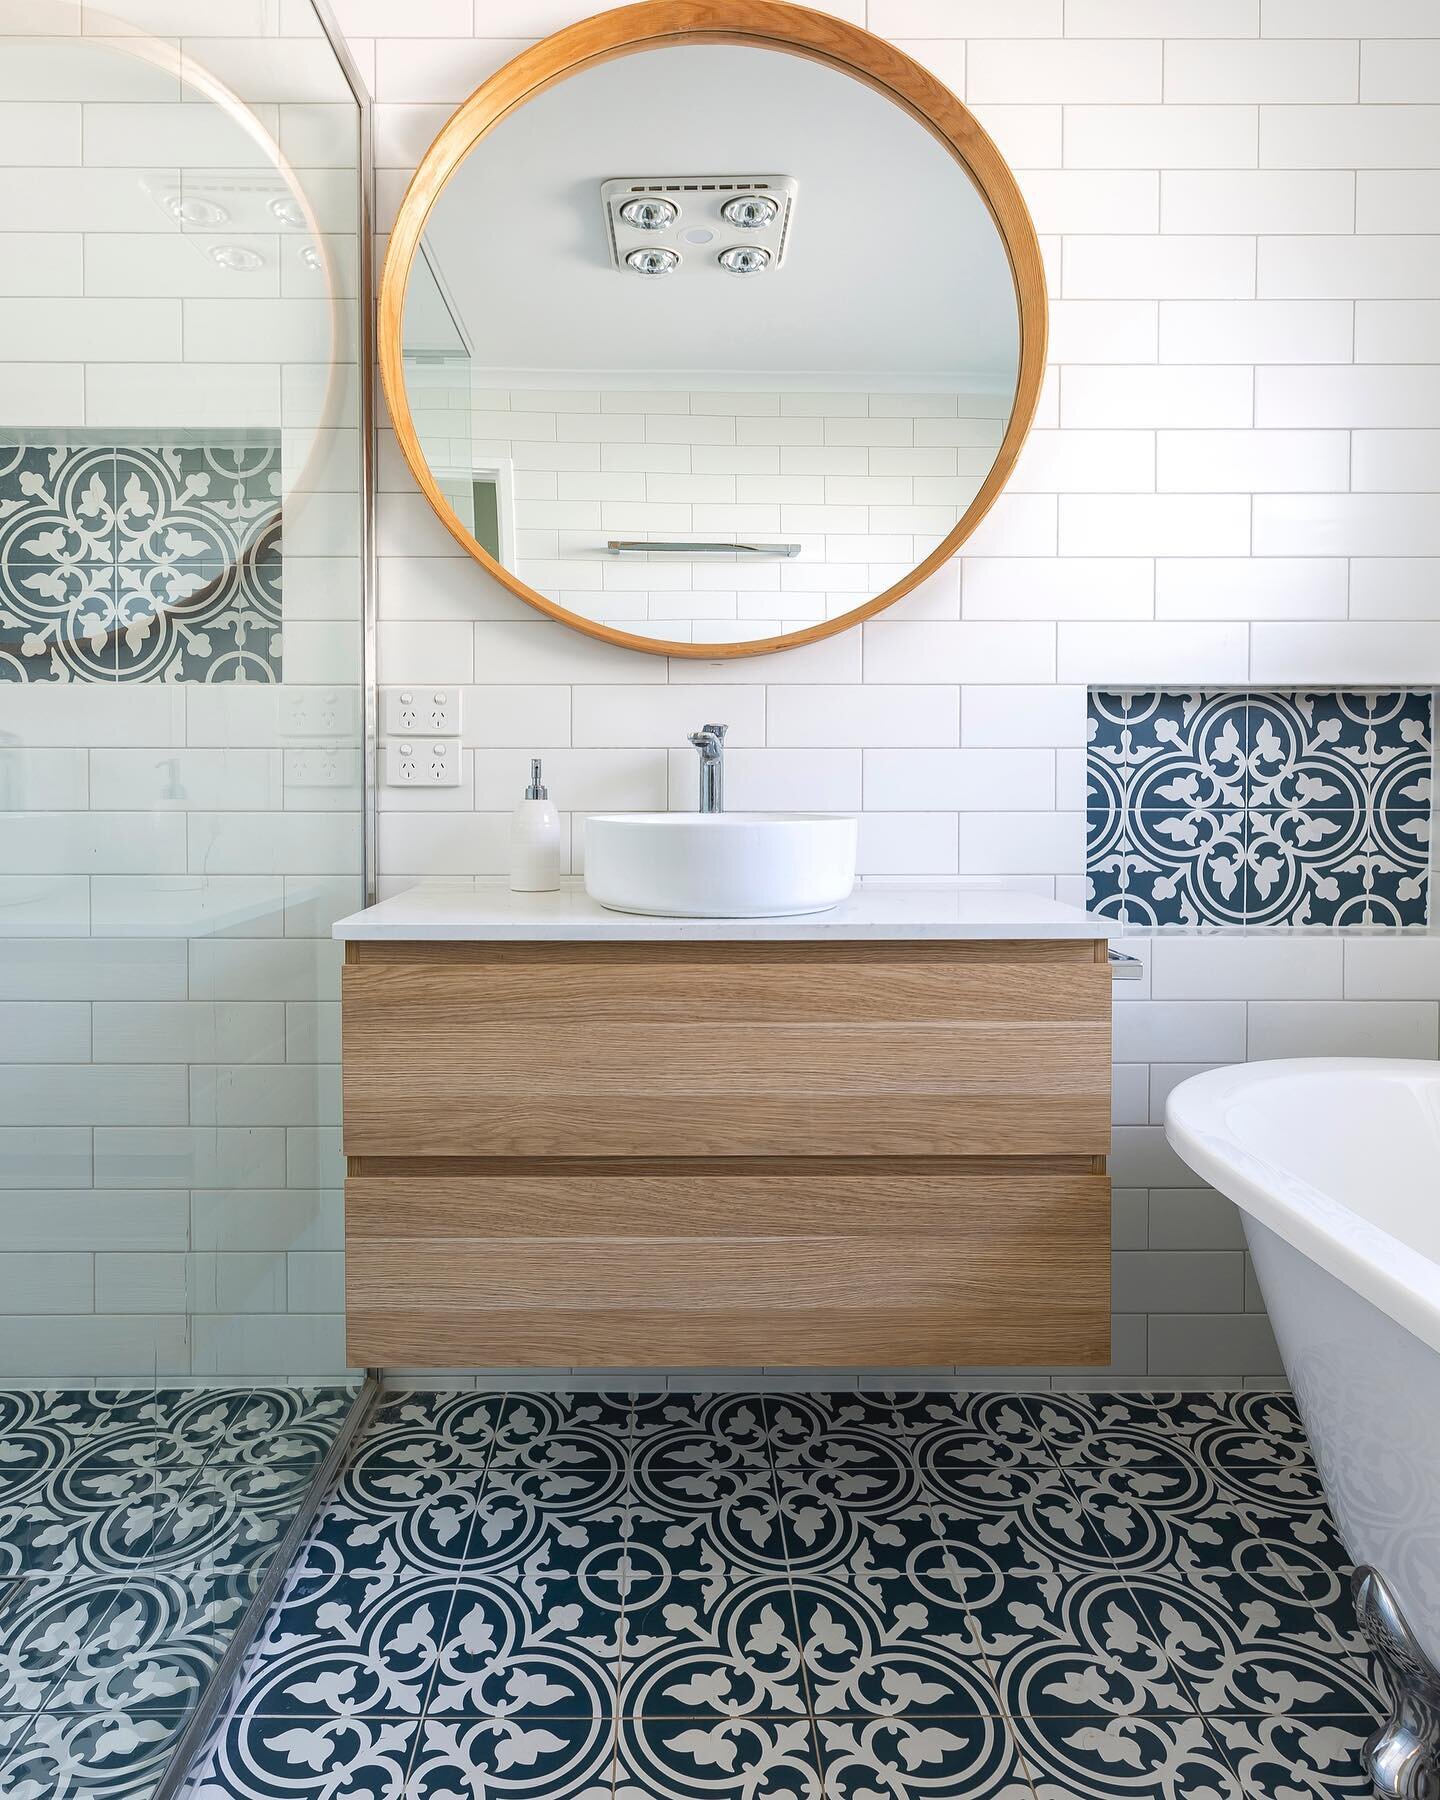 Pattern tile with a clawfoot bath 👌

The most beautiful heritage style bathroom for our clients in Kaleen. 

@rivoland_tiles 
@harveynormancommercial 
@advancedglassact 
@marquisaus 
@benkingphotography 
@darmodyprojects

#canberrarenovations #darmo